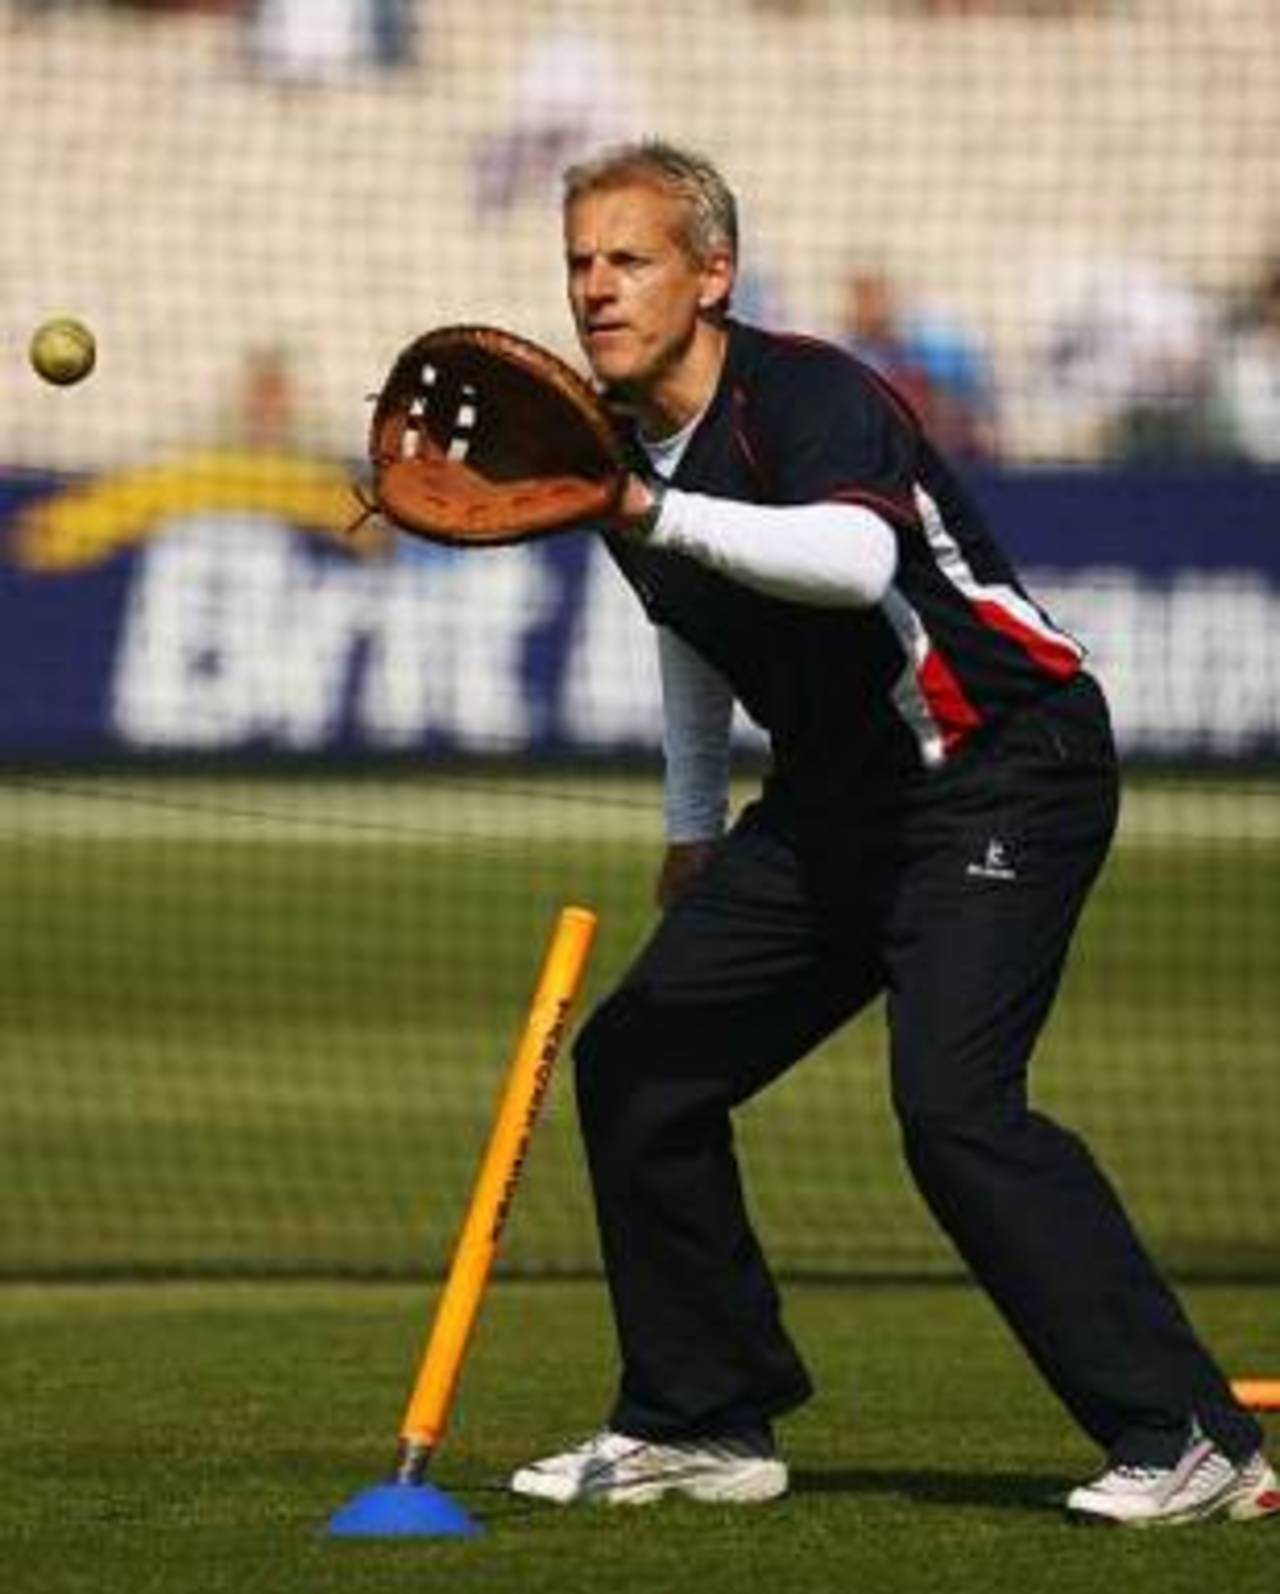 Peter Moores: "You will positively fall into my mitt, you spherical object you"&nbsp;&nbsp;&bull;&nbsp;&nbsp;Getty Images